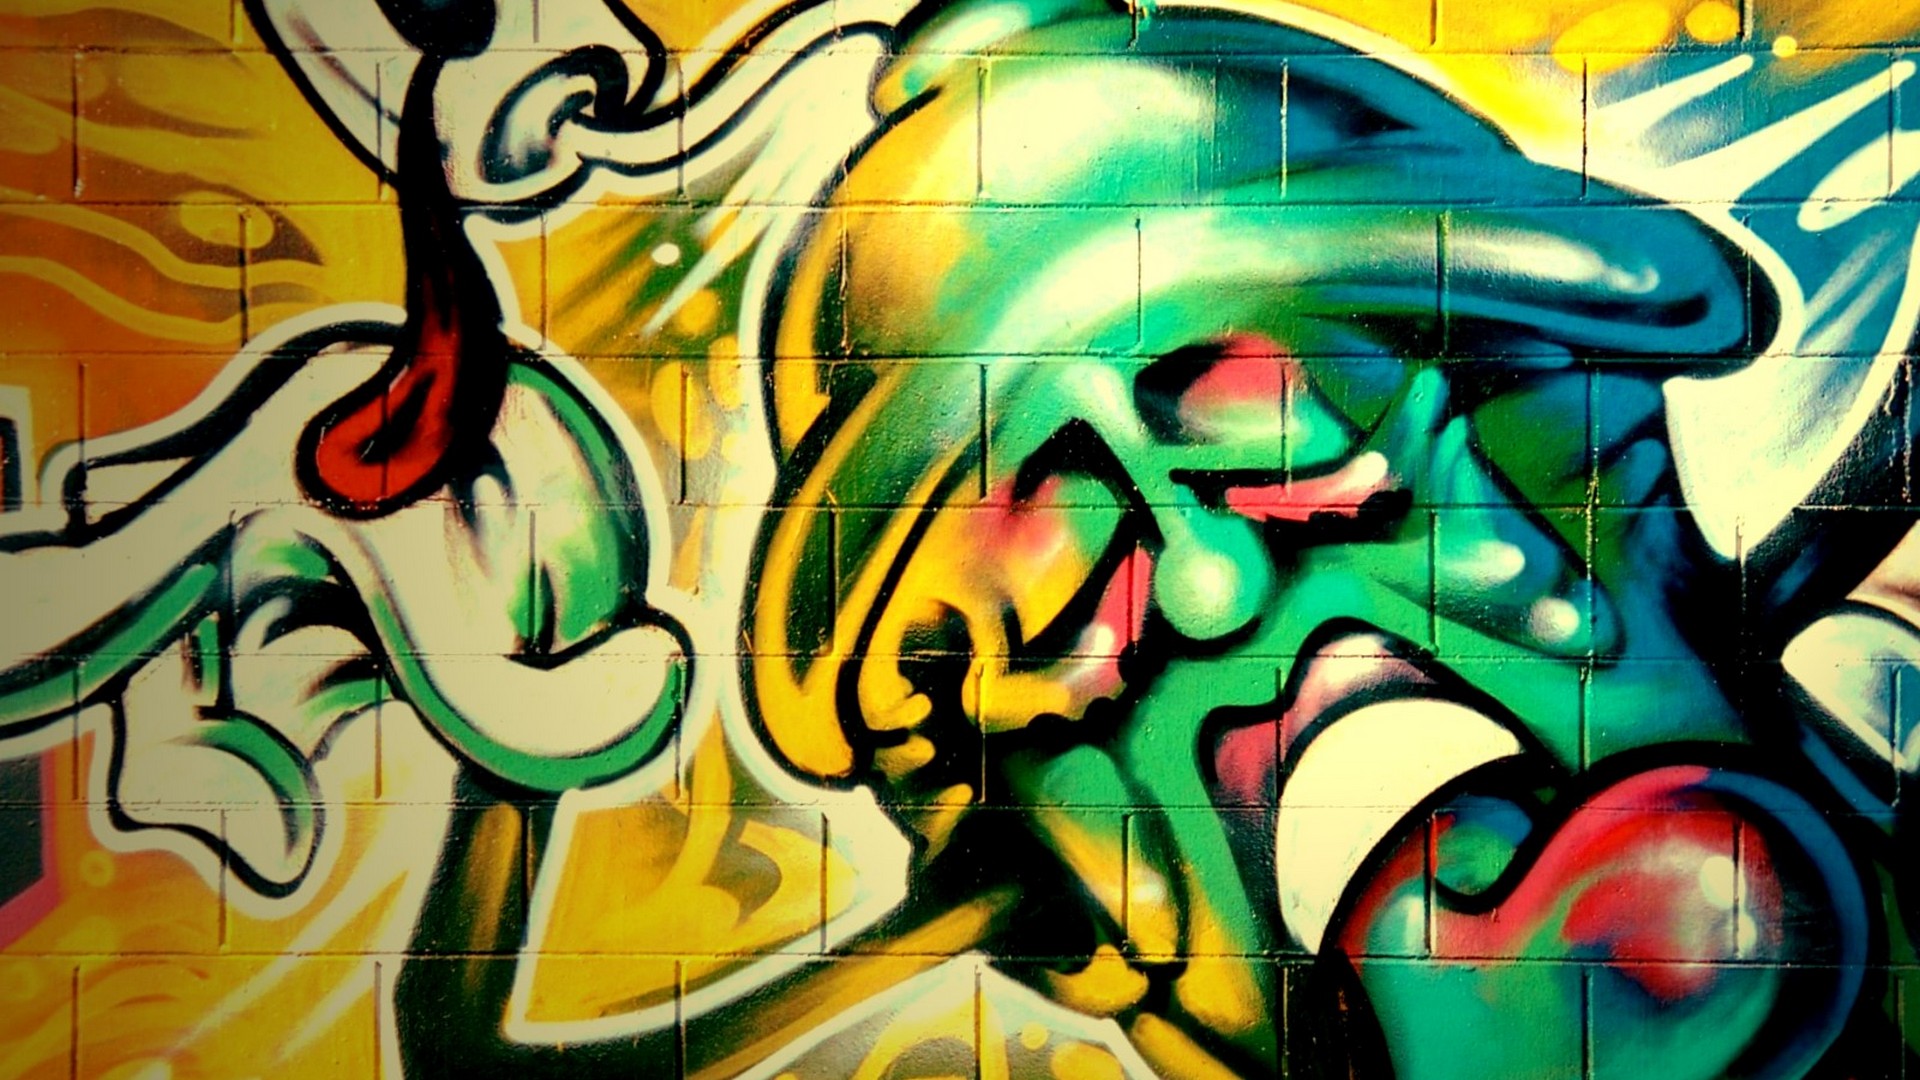 Graffiti Desktop Backgrounds With Resolution 1920X1080 pixel. You can make this wallpaper for your Desktop Computer Backgrounds, Mac Wallpapers, Android Lock screen or iPhone Screensavers